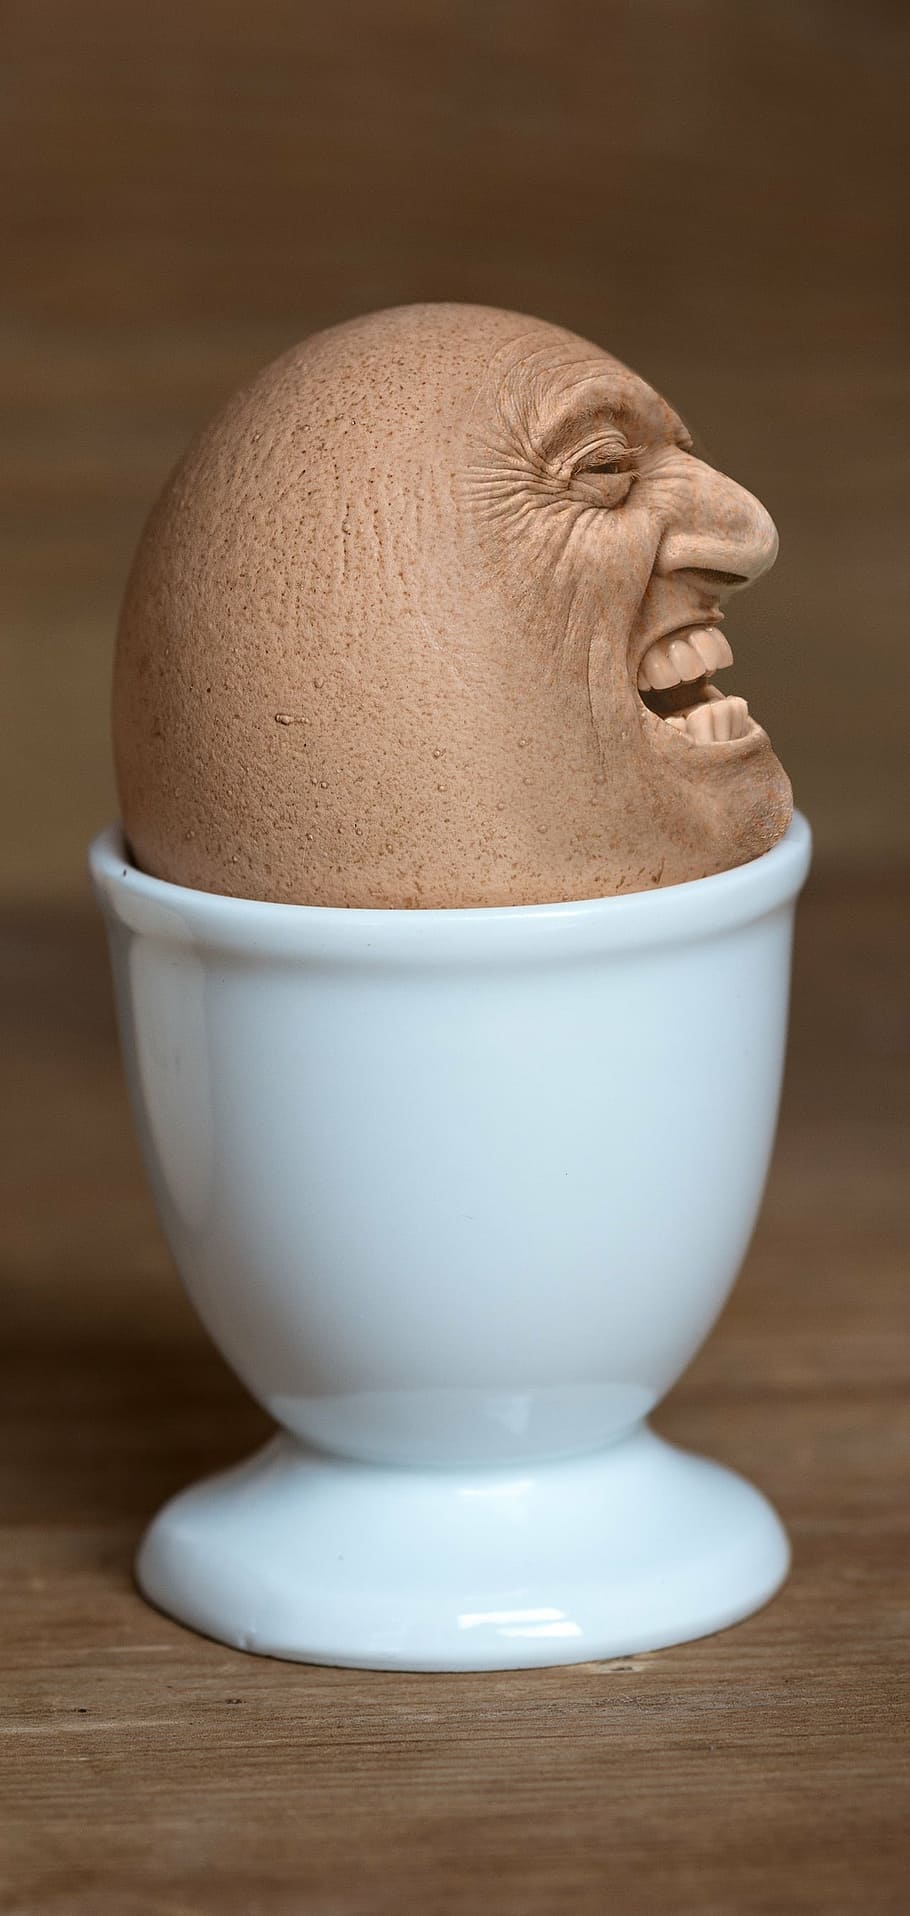 donald trump egg, footed cup, iman, face, egg face, egg cups, food-photography, assembly, making a face, manipulation